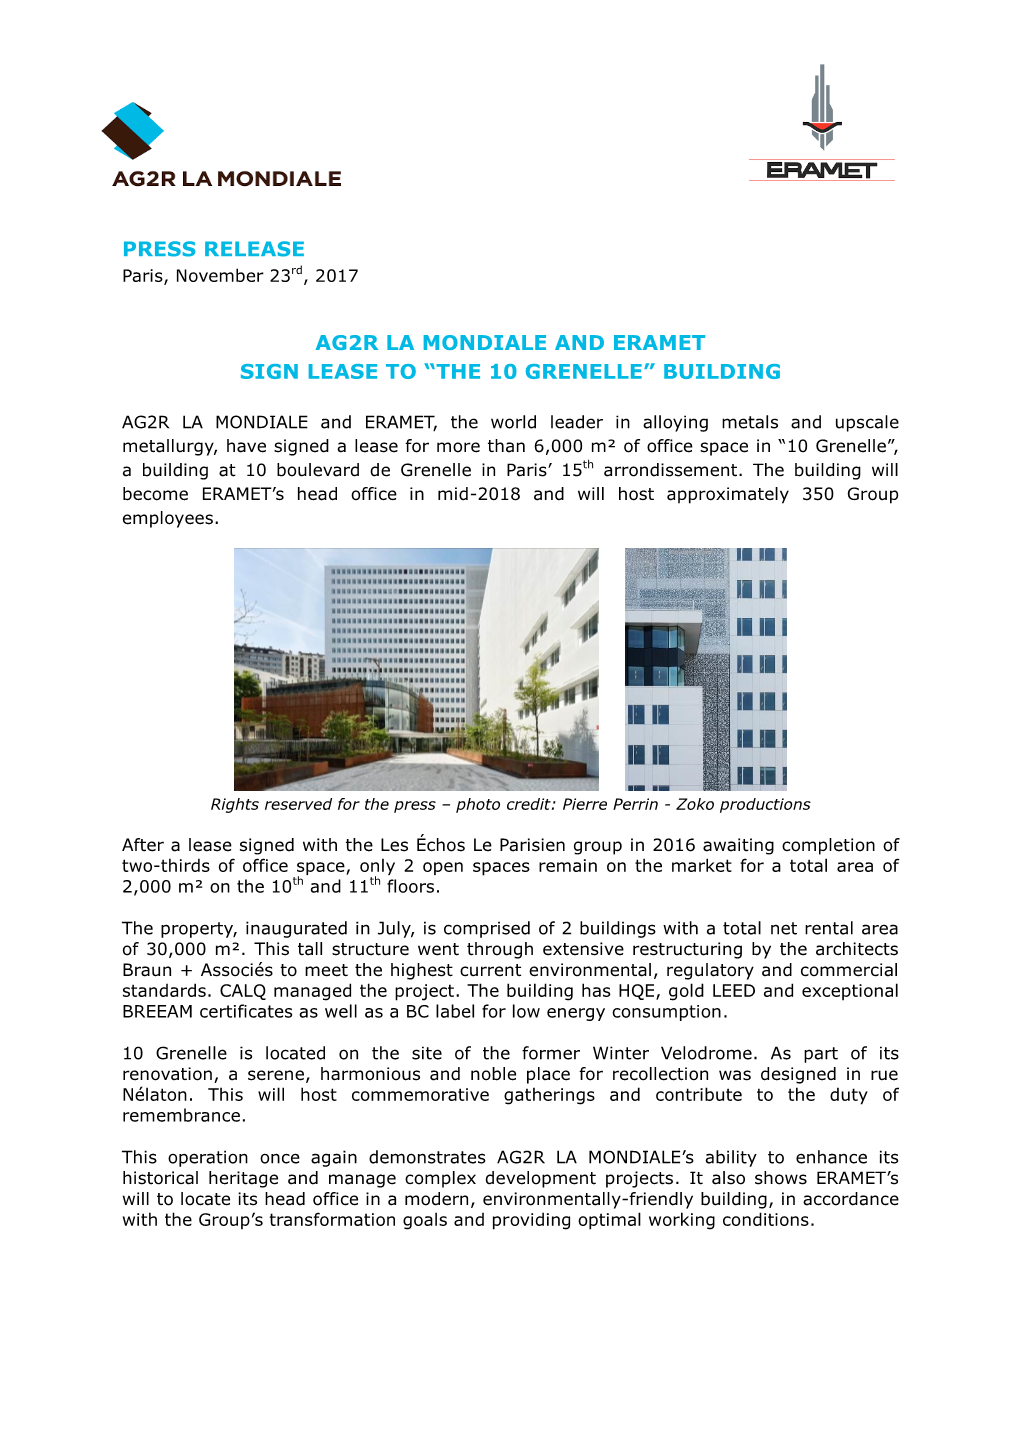 Ag2r La Mondiale and Eramet Sign Lease to “The 10 Grenelle” Building